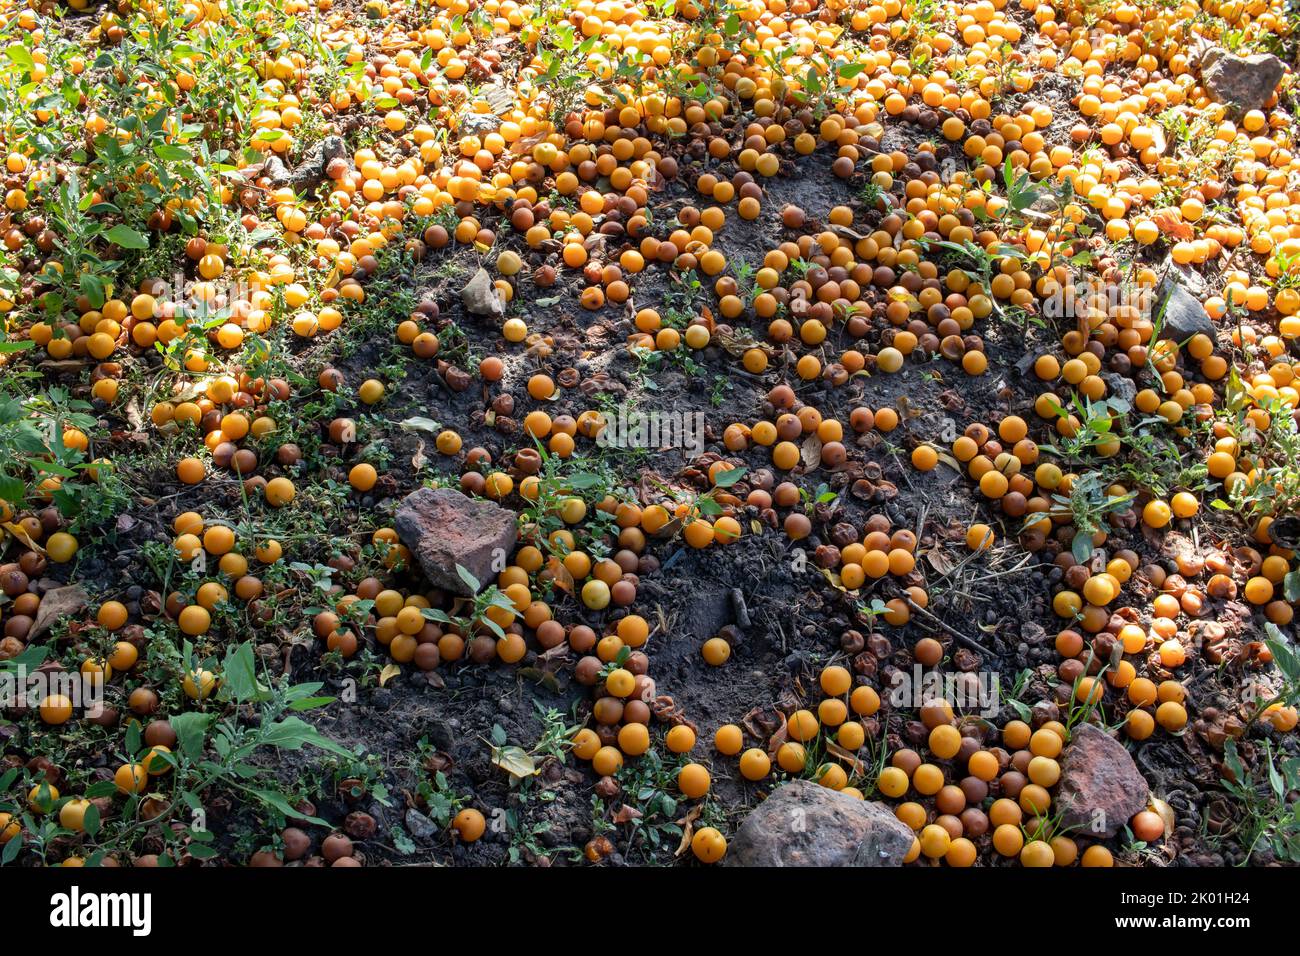 Overripe rotten yellow plum fruits on the ground under tree in the garden. Summer, autumn, fall harvesting season. Composting, recycling, zero waste e Stock Photo